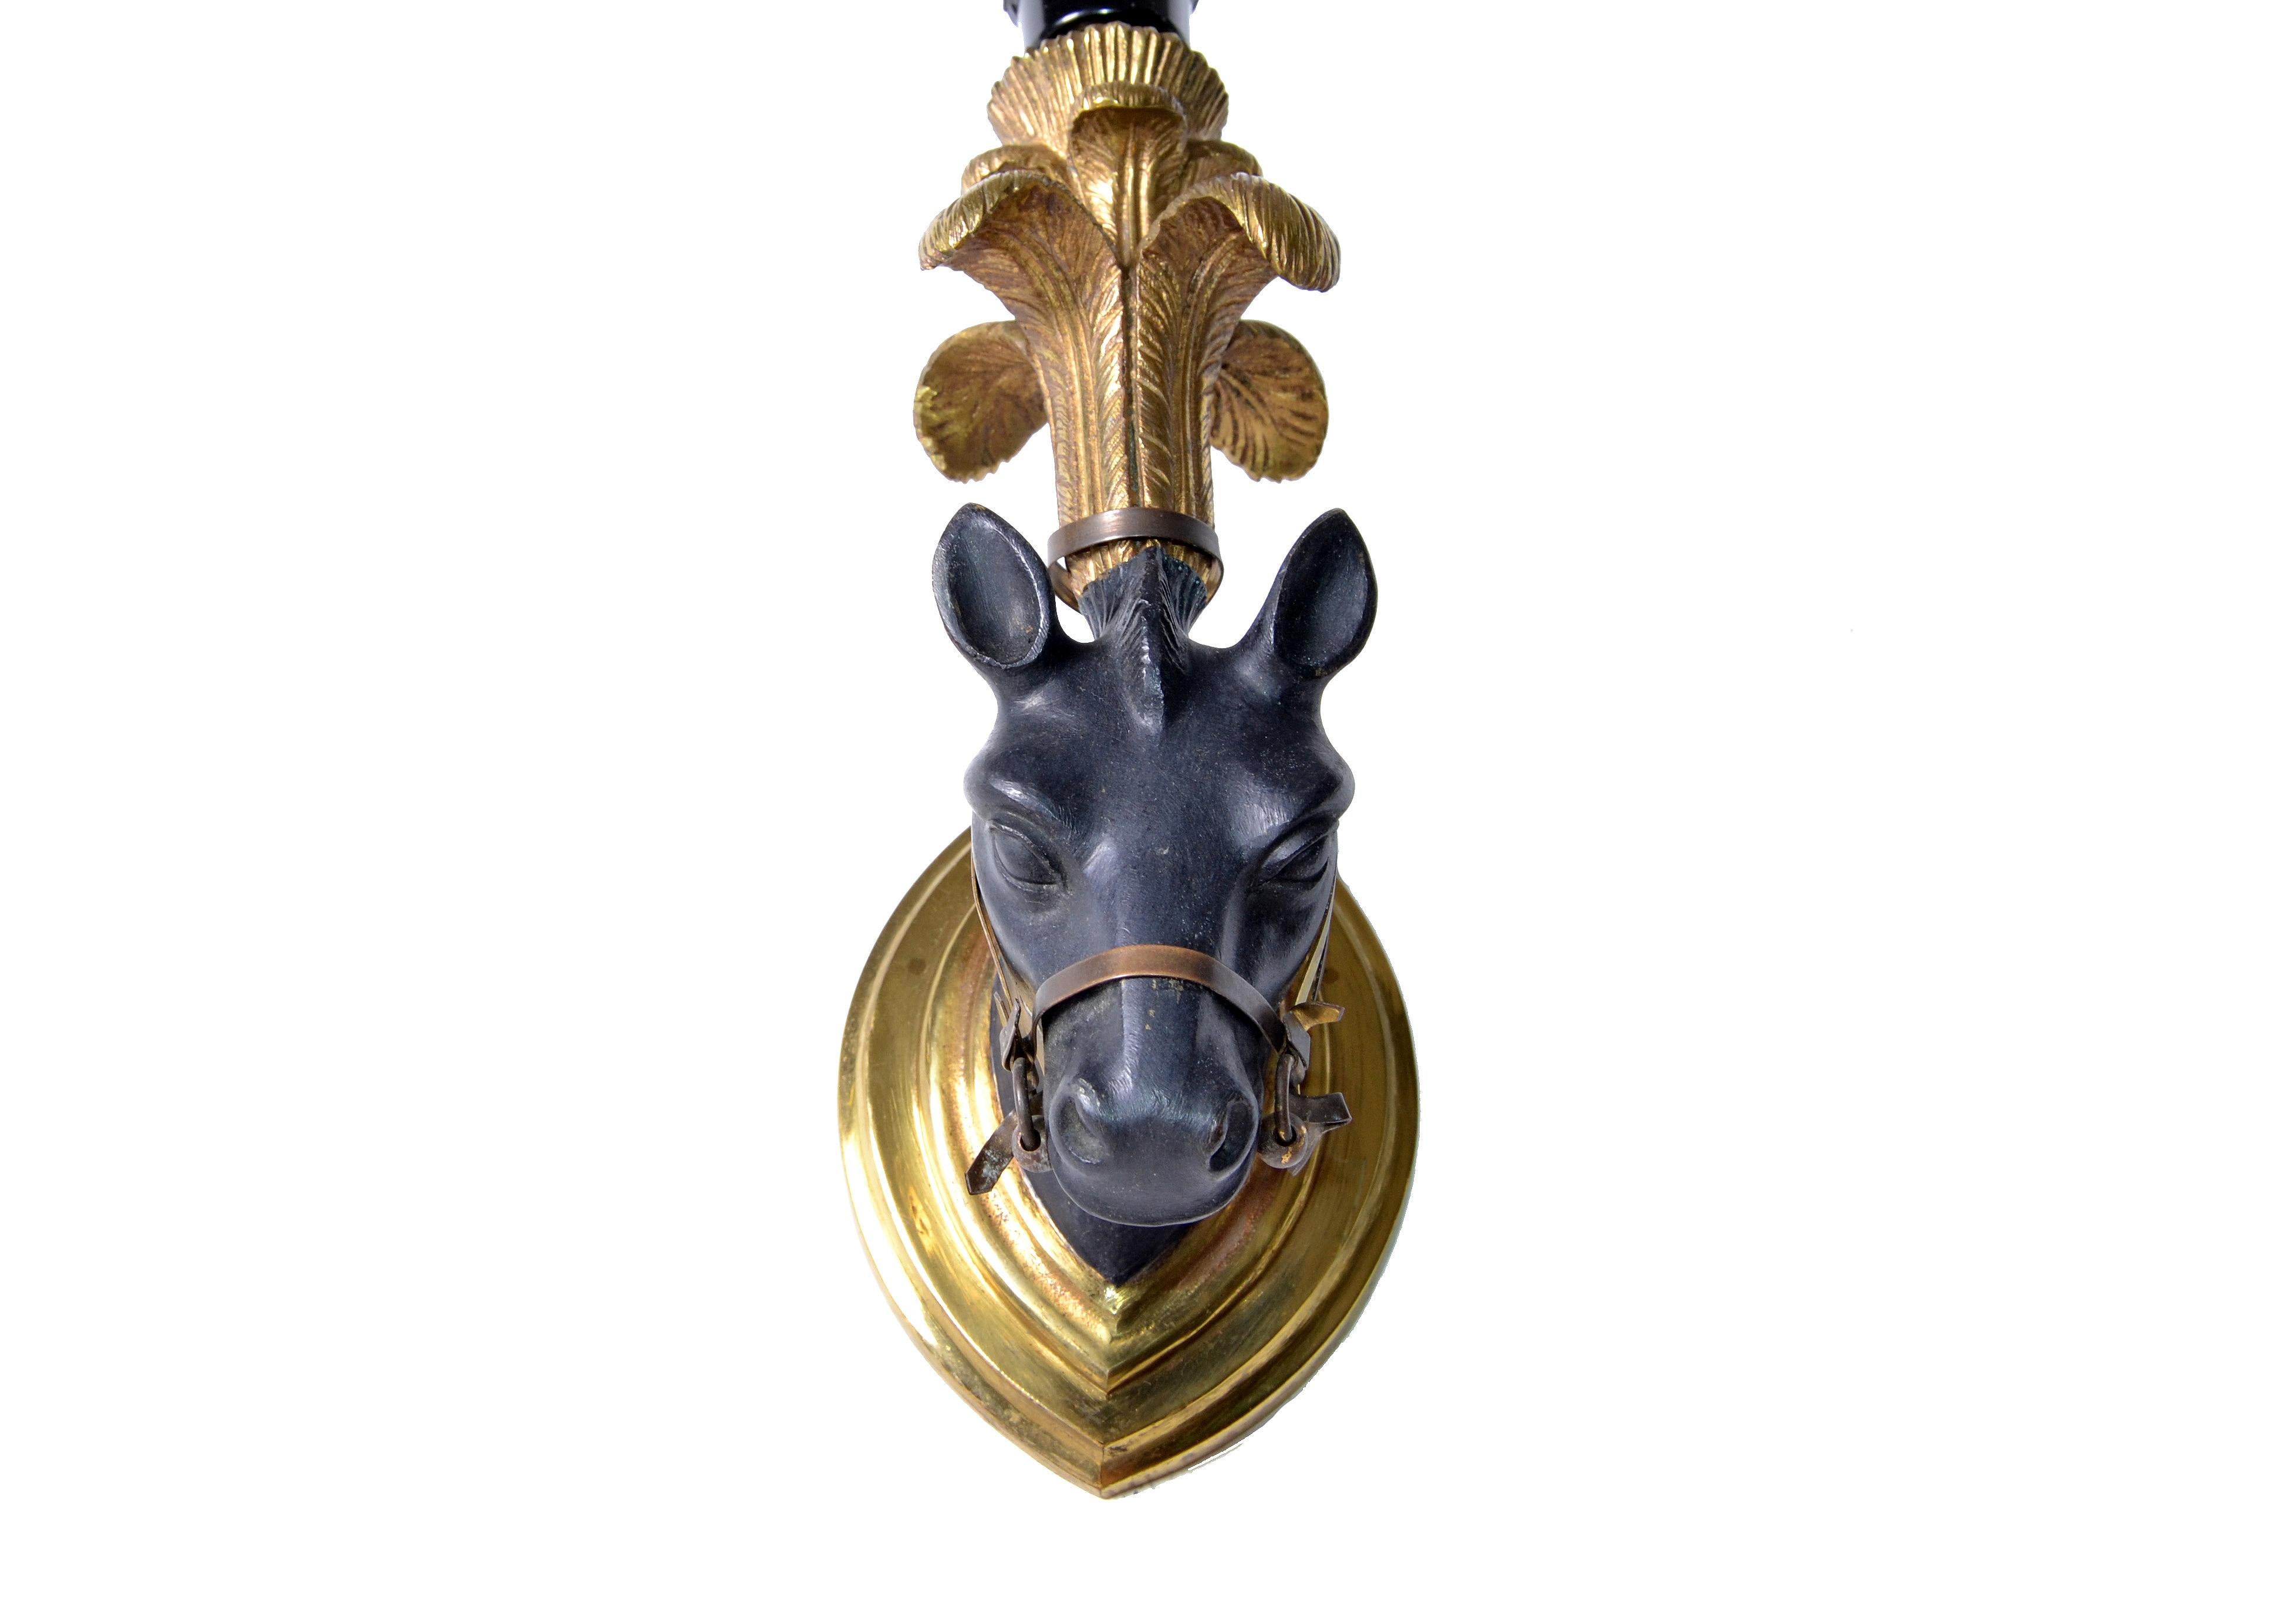 Ebonized French Mid-Century Modern Black & Gold Bronze Horse Sconces, Wall Lights - Pair For Sale